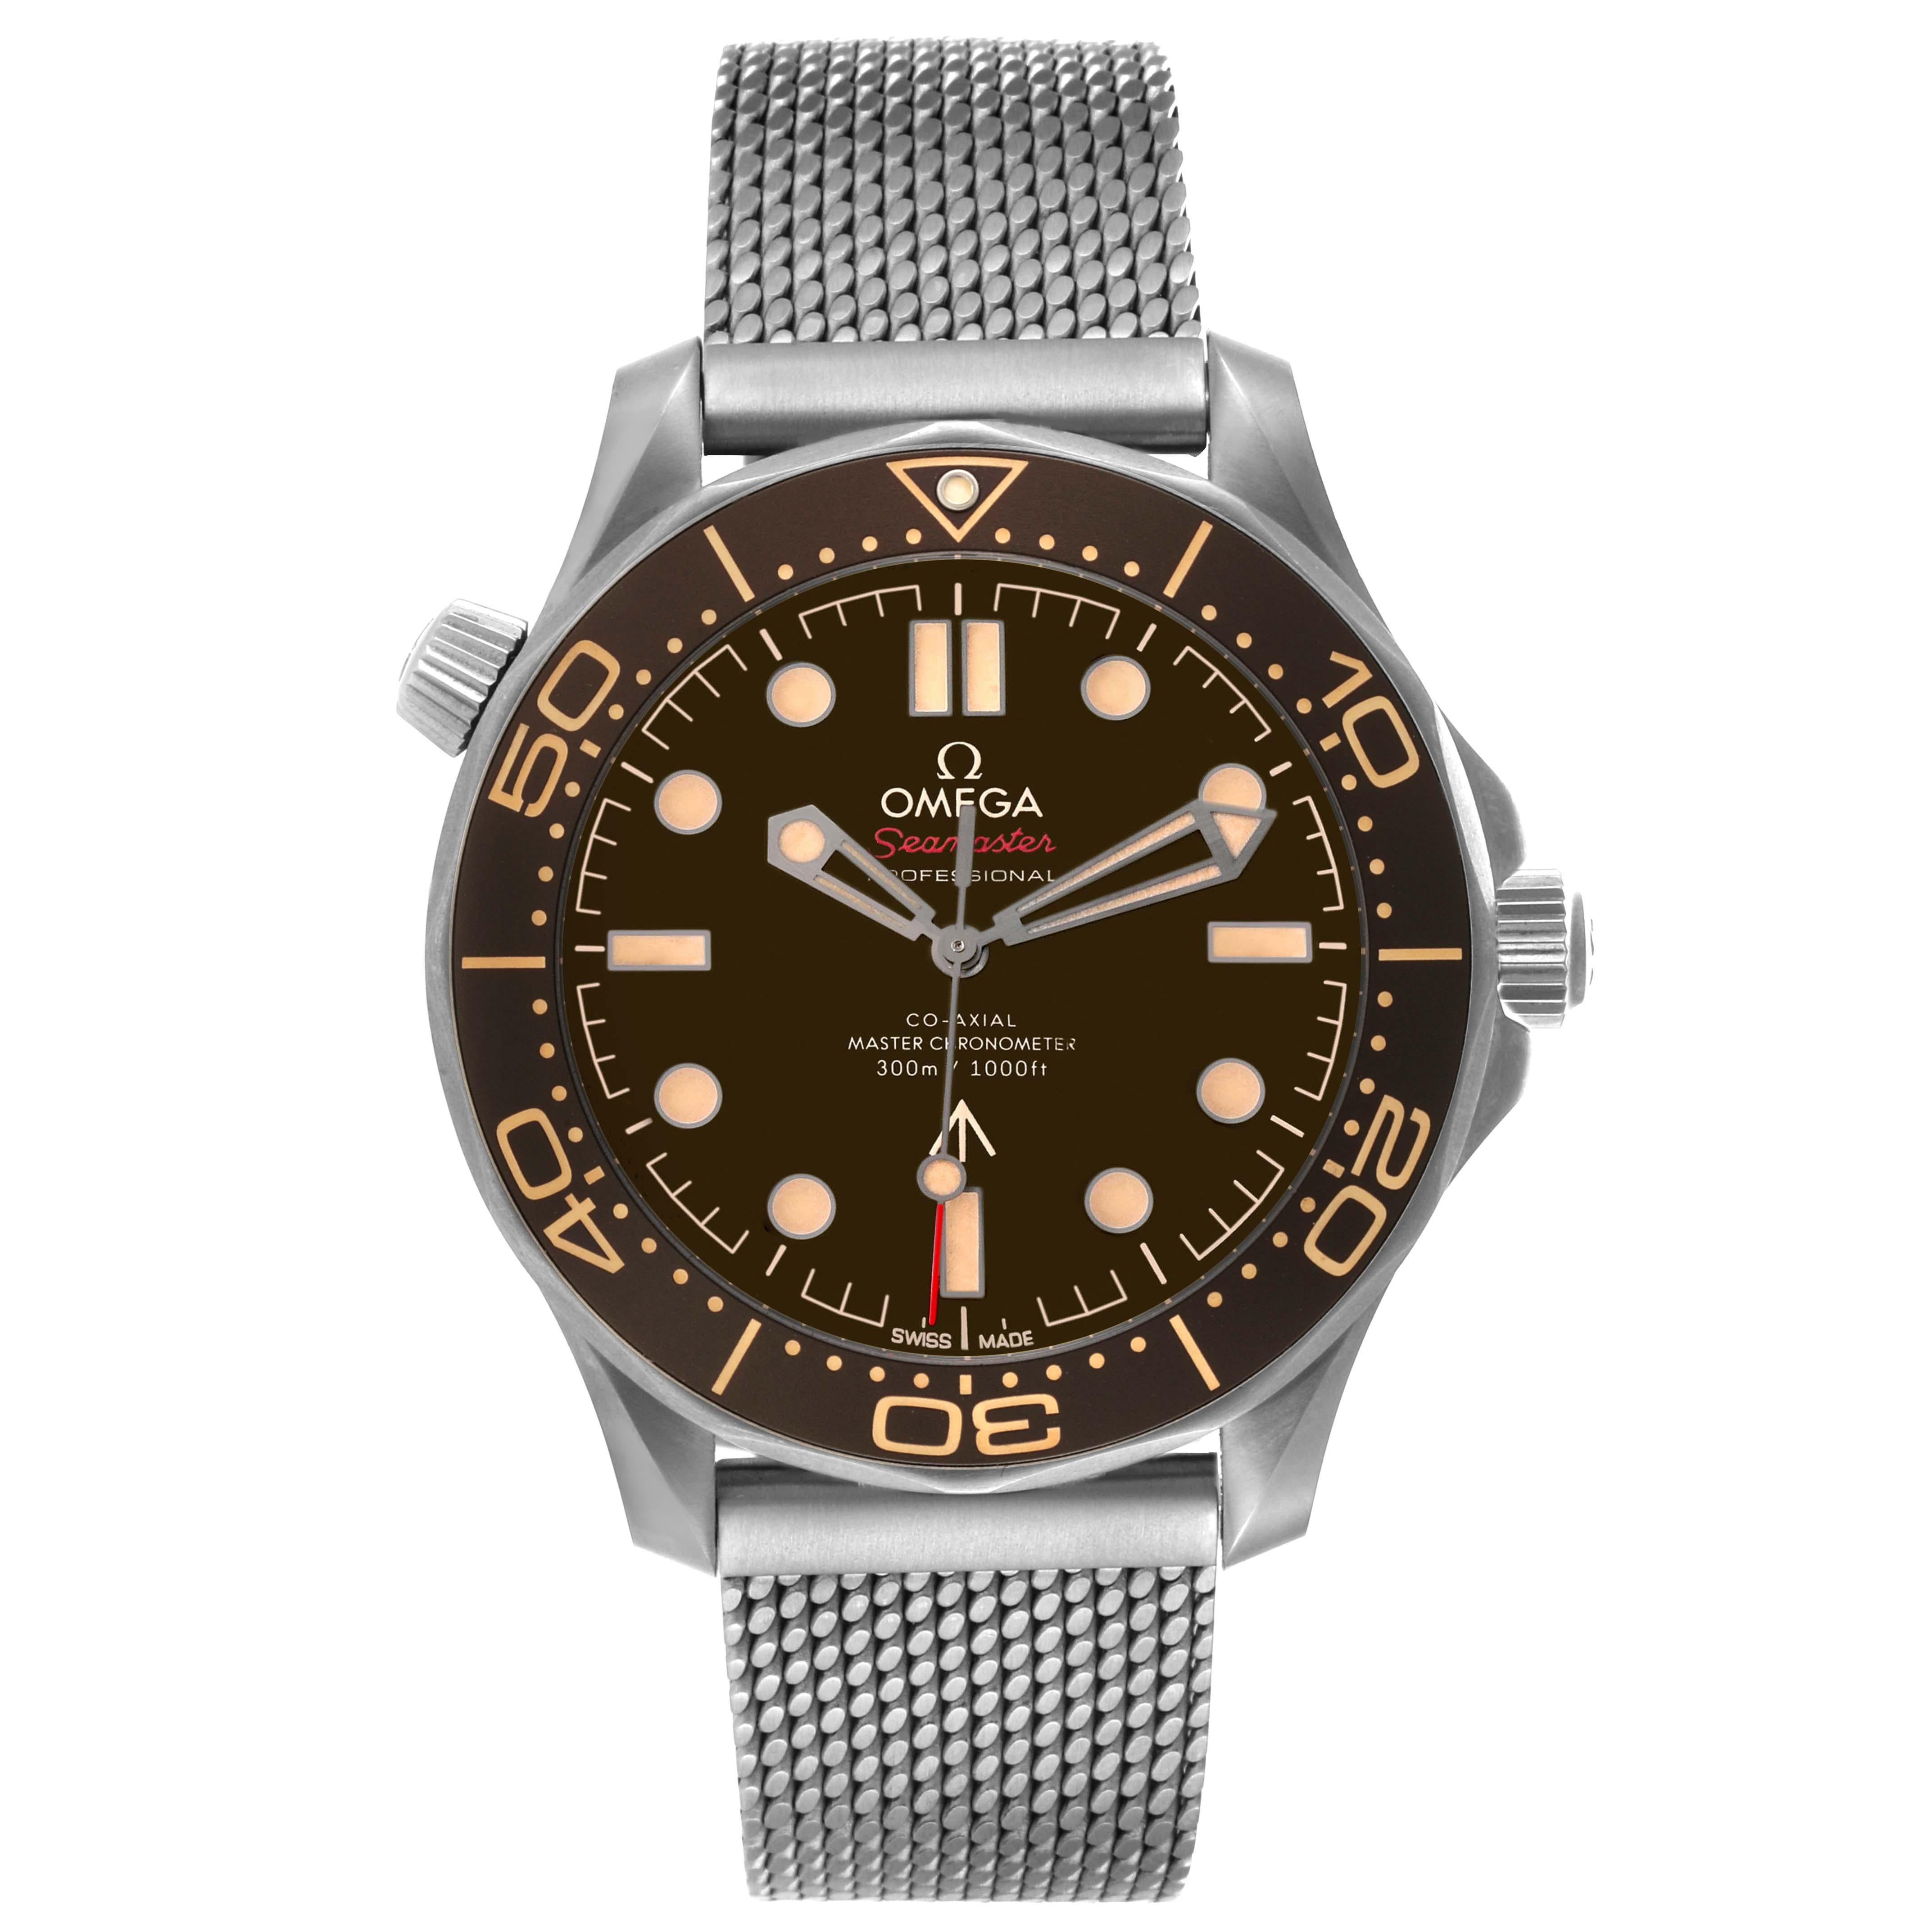 Omega Seamaster 007 Edition Titanium Mens Watch 210.90.42.20.01.001 Card. Automatic self-winding movement. Titanium round case 42.0 mm in diameter. Brown unidirectional rotating bezel. Scratch resistant sapphire crystal. Matte tropical brown